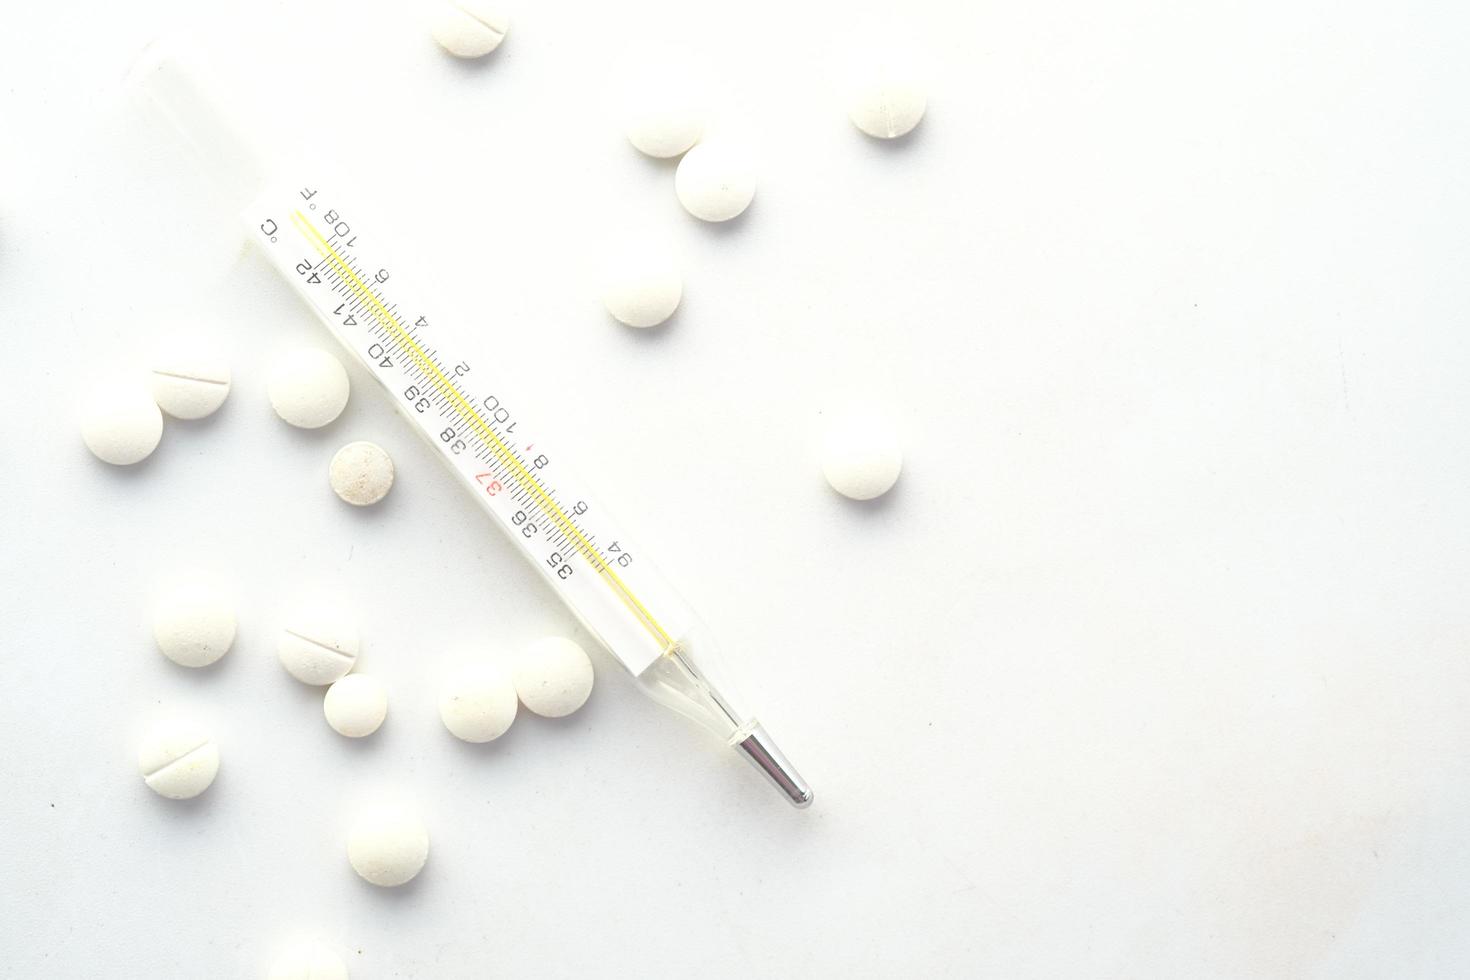 Medical thermometer and pills on white texture background photo